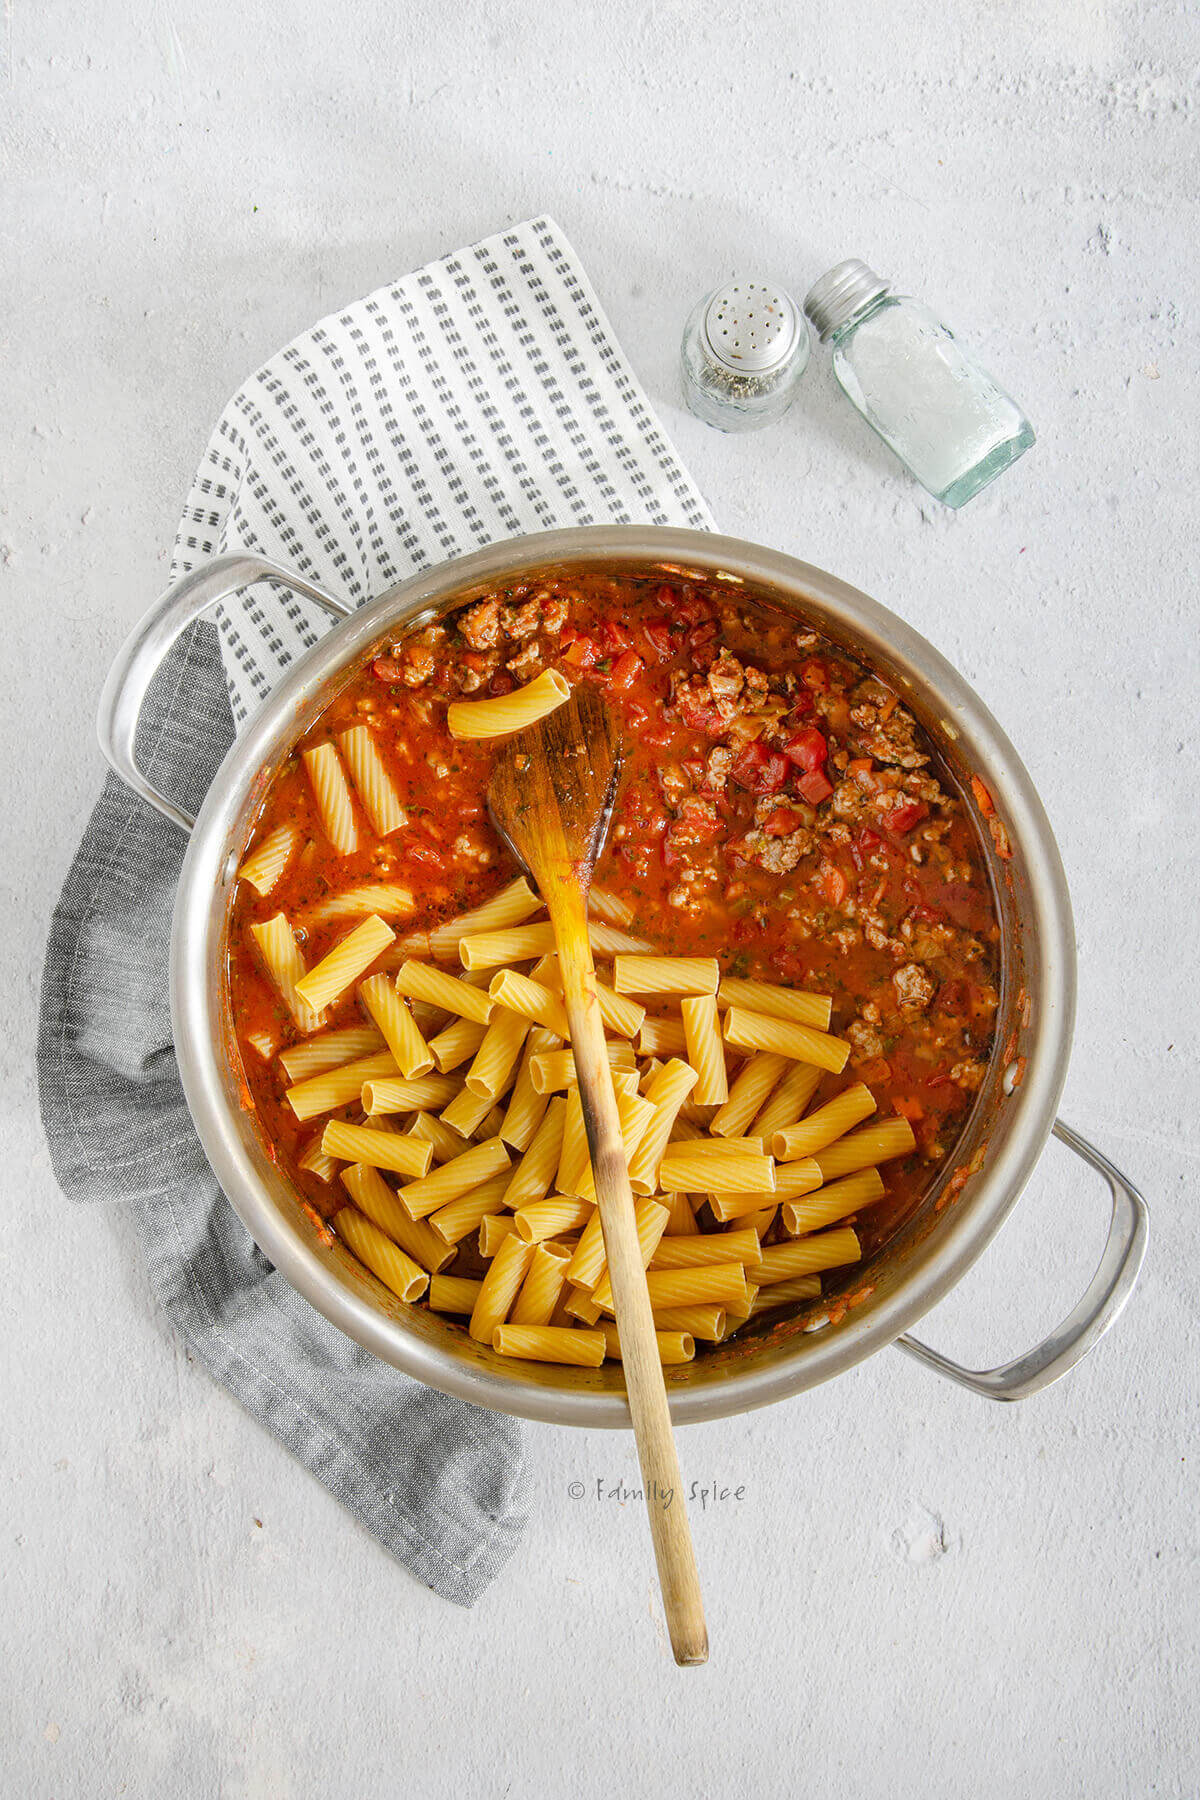 Rigatoni pasta added to bolognese sauce in a stainless pot